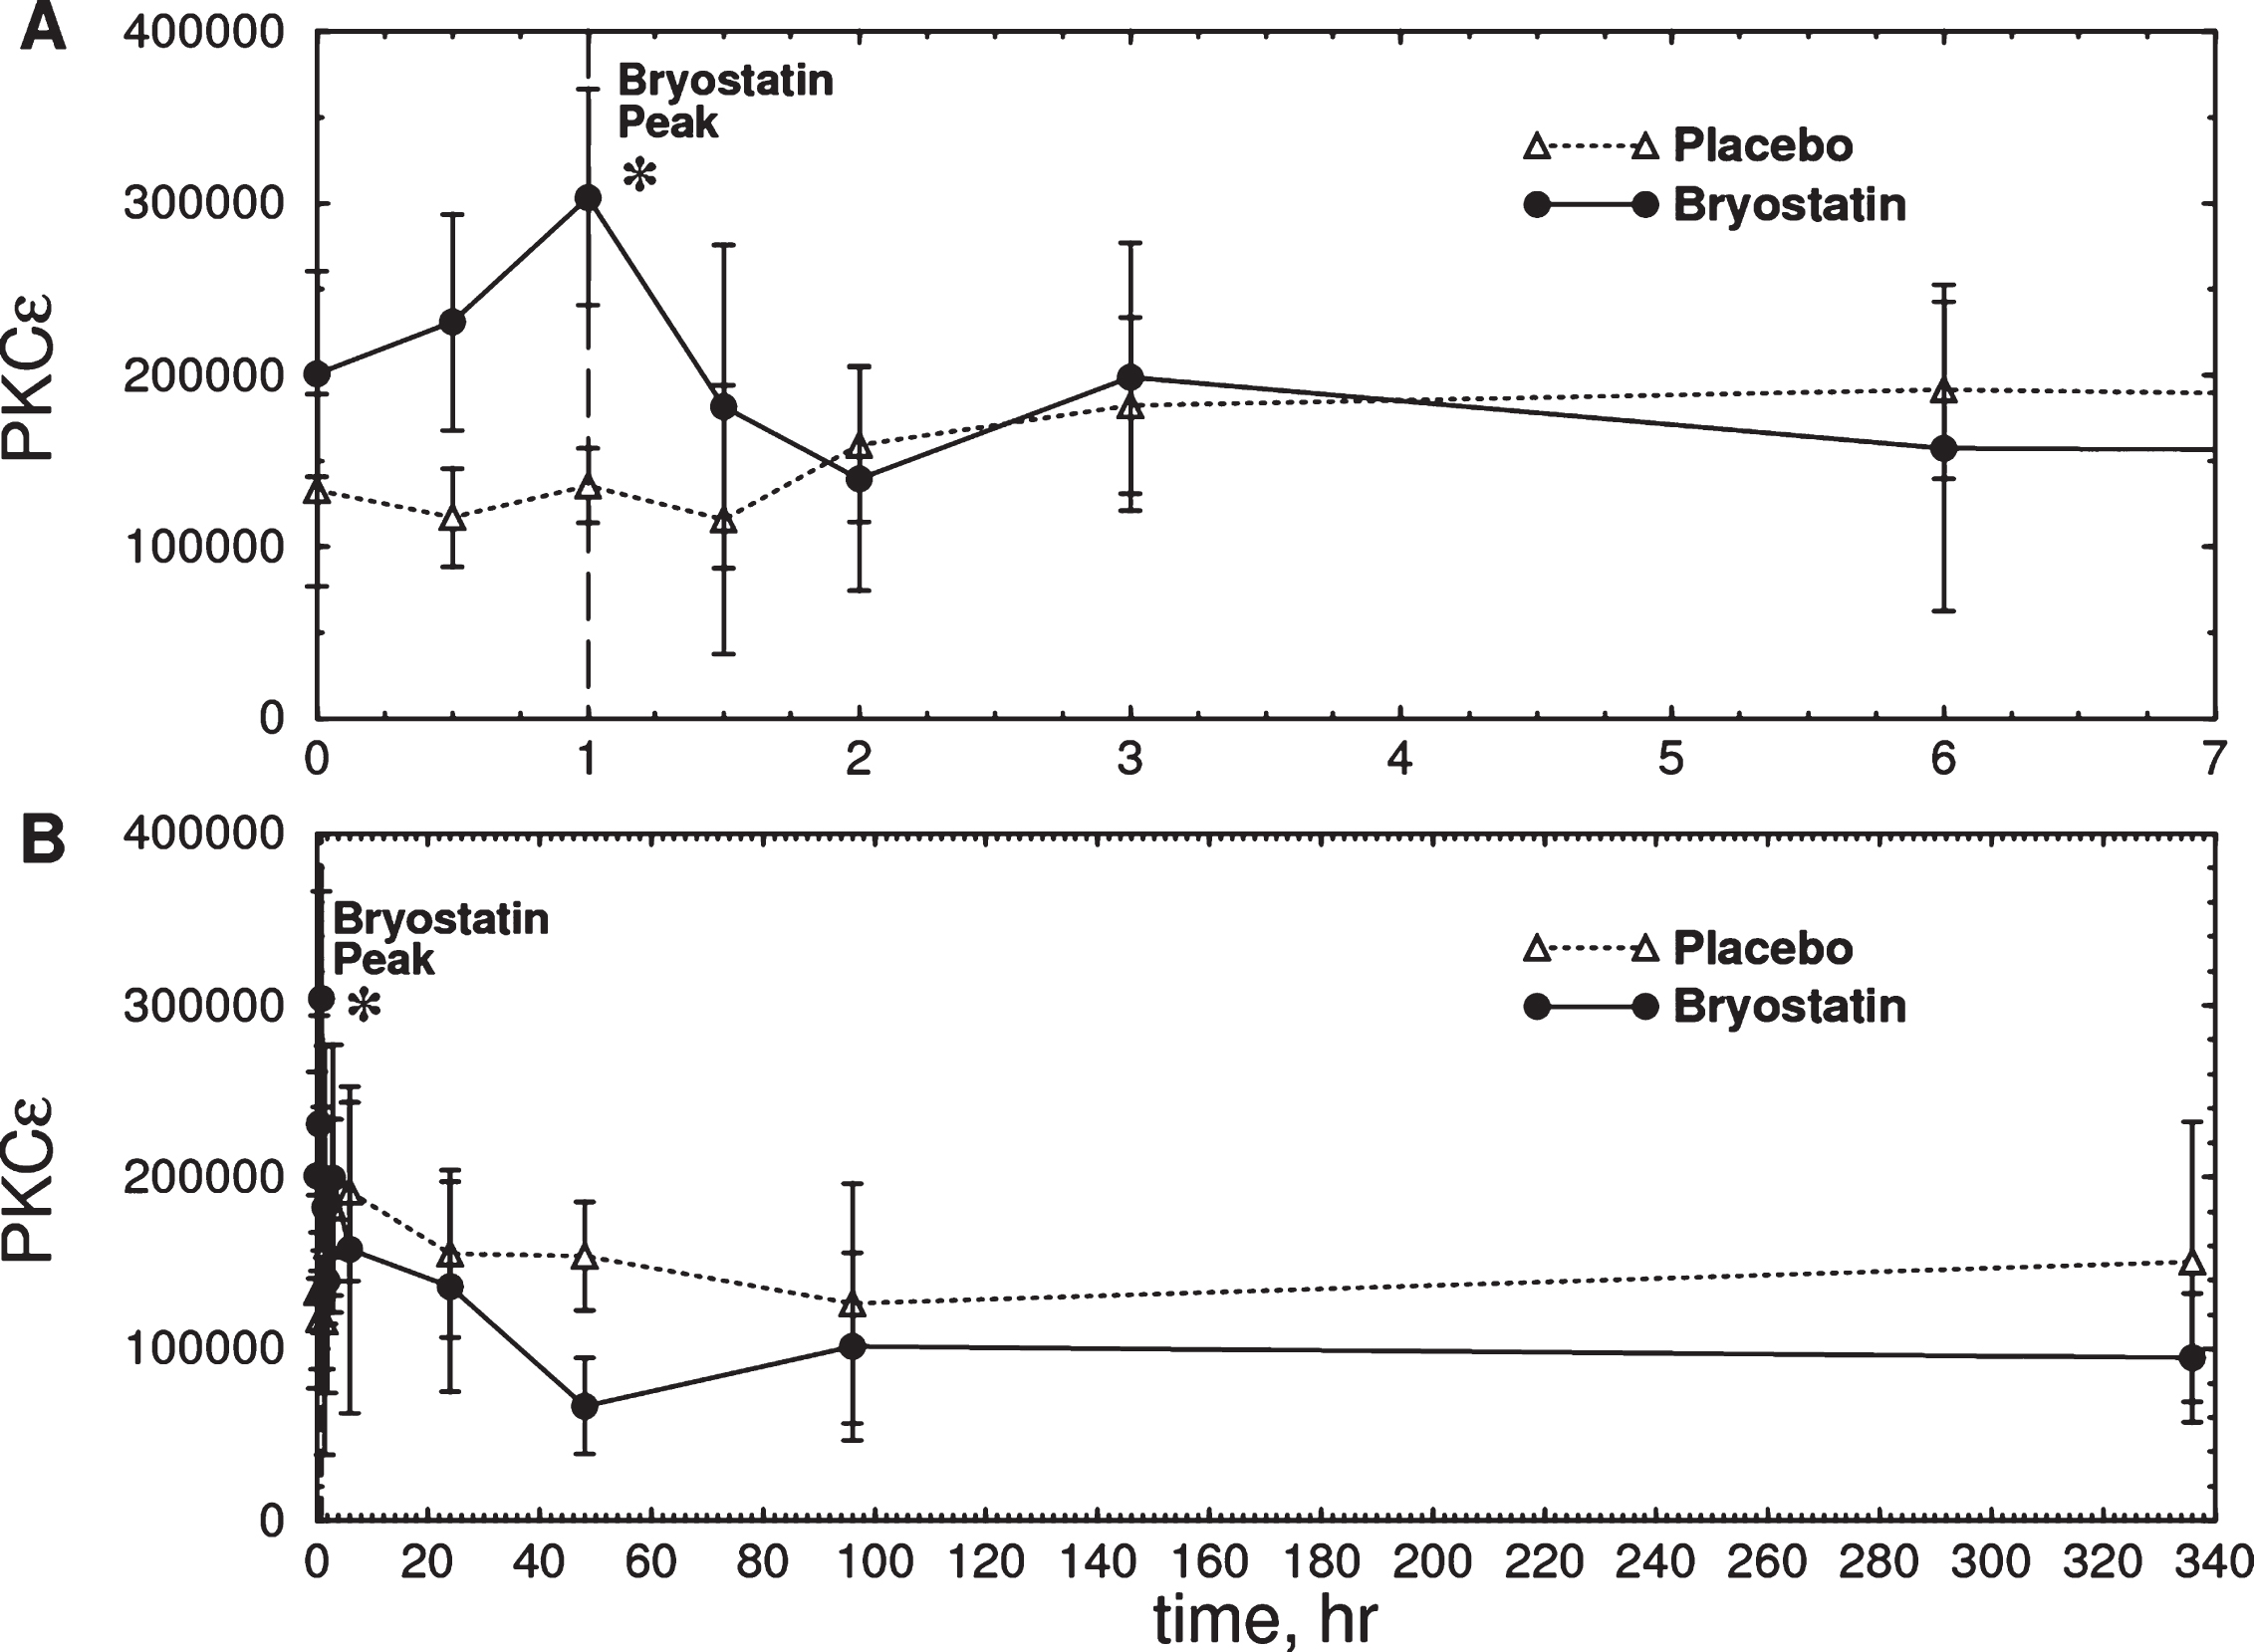 Time course of total PKCɛ measured in PBMC samples from six Phase IIa subjects treated with bryostatin 1. A) Expanded scale (0–7 h). B) Full scale (0–340 h). There was an increase in total PKCɛ in the bryostatin group but not in the placebo at 1 h after the start of infusion (Bryostatin F(7.013, 21.039) = 3.026, p = 0.023; placebo F(10,20) = 0.75, p = 0.67, repeated measures ANOVA; p = 0.0185 at 1 h, two-tailed matched pair t-test) Bryostatin also decreased PKCɛ between 12 h and 72 h (p = 0.0296, two-tailed matched pair t-test, average of 12, 48, and 72 h points). Data points are mean PKCɛ in arbitrary units±SEM (Placebo, n = 3; Bryostatin 1, n = 6). The treated and placebo groups are not significantly different at t = 0.